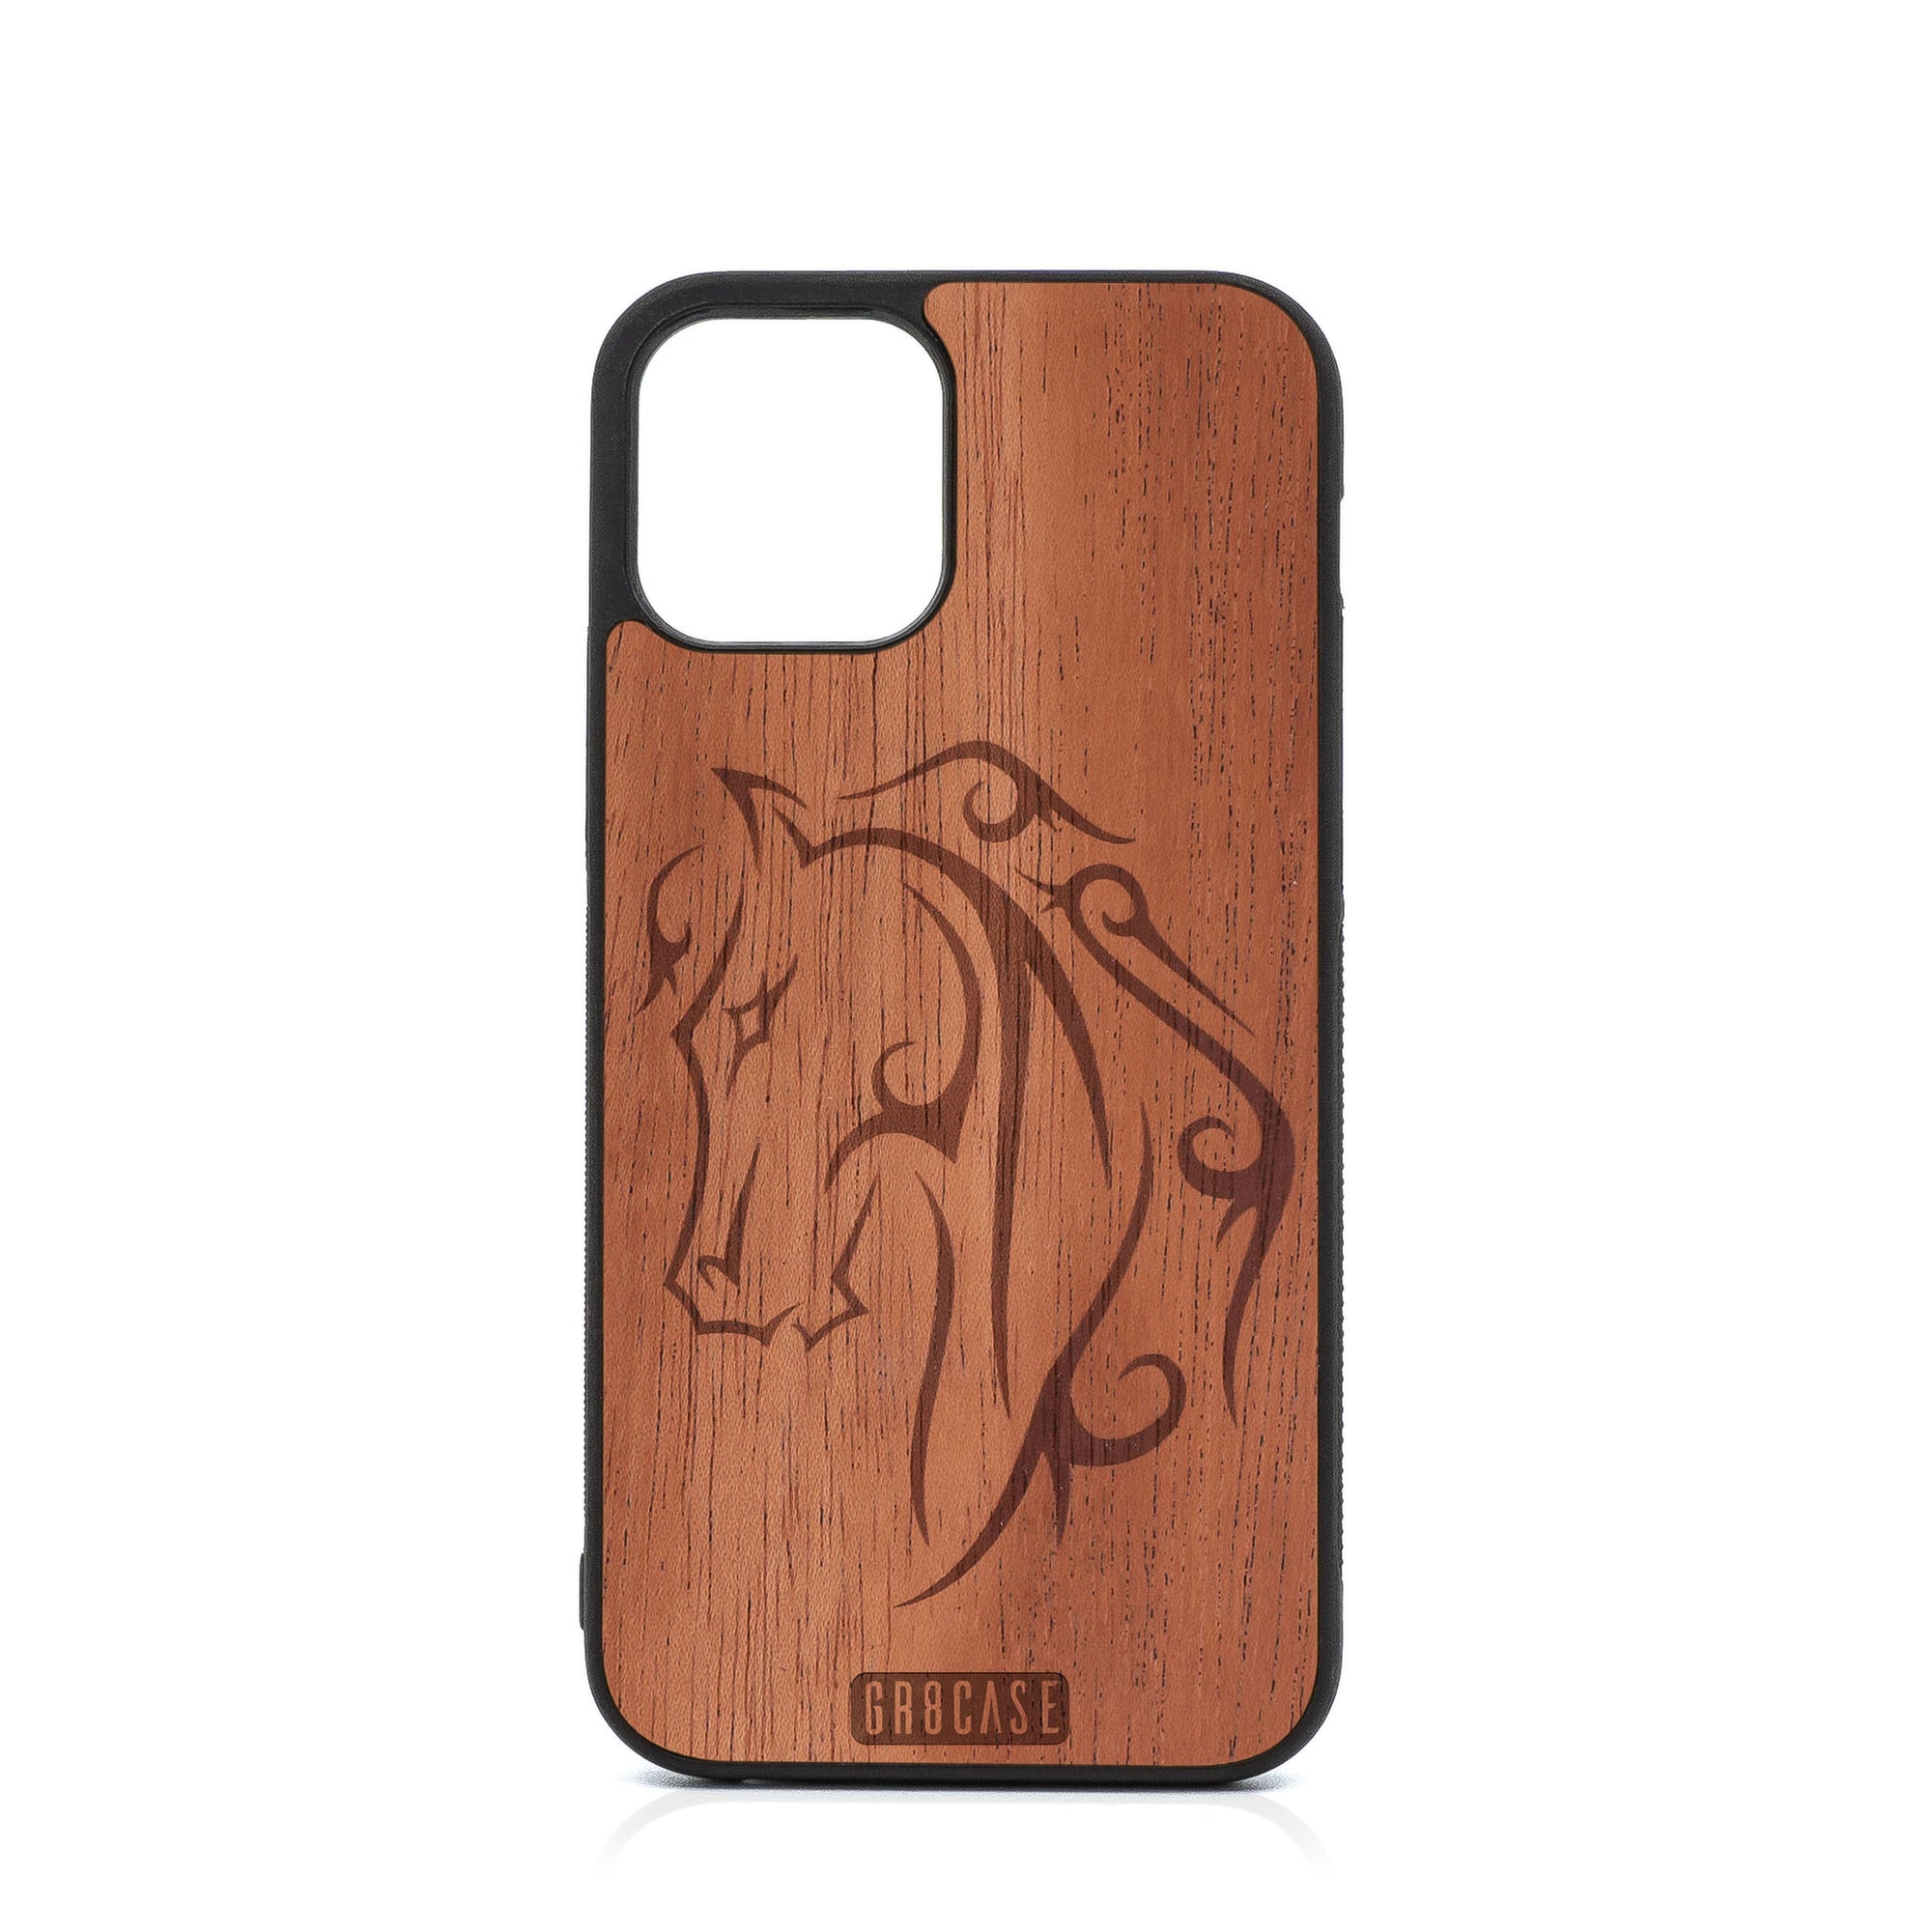 Horse Tattoo Design Wood Case For iPhone 12